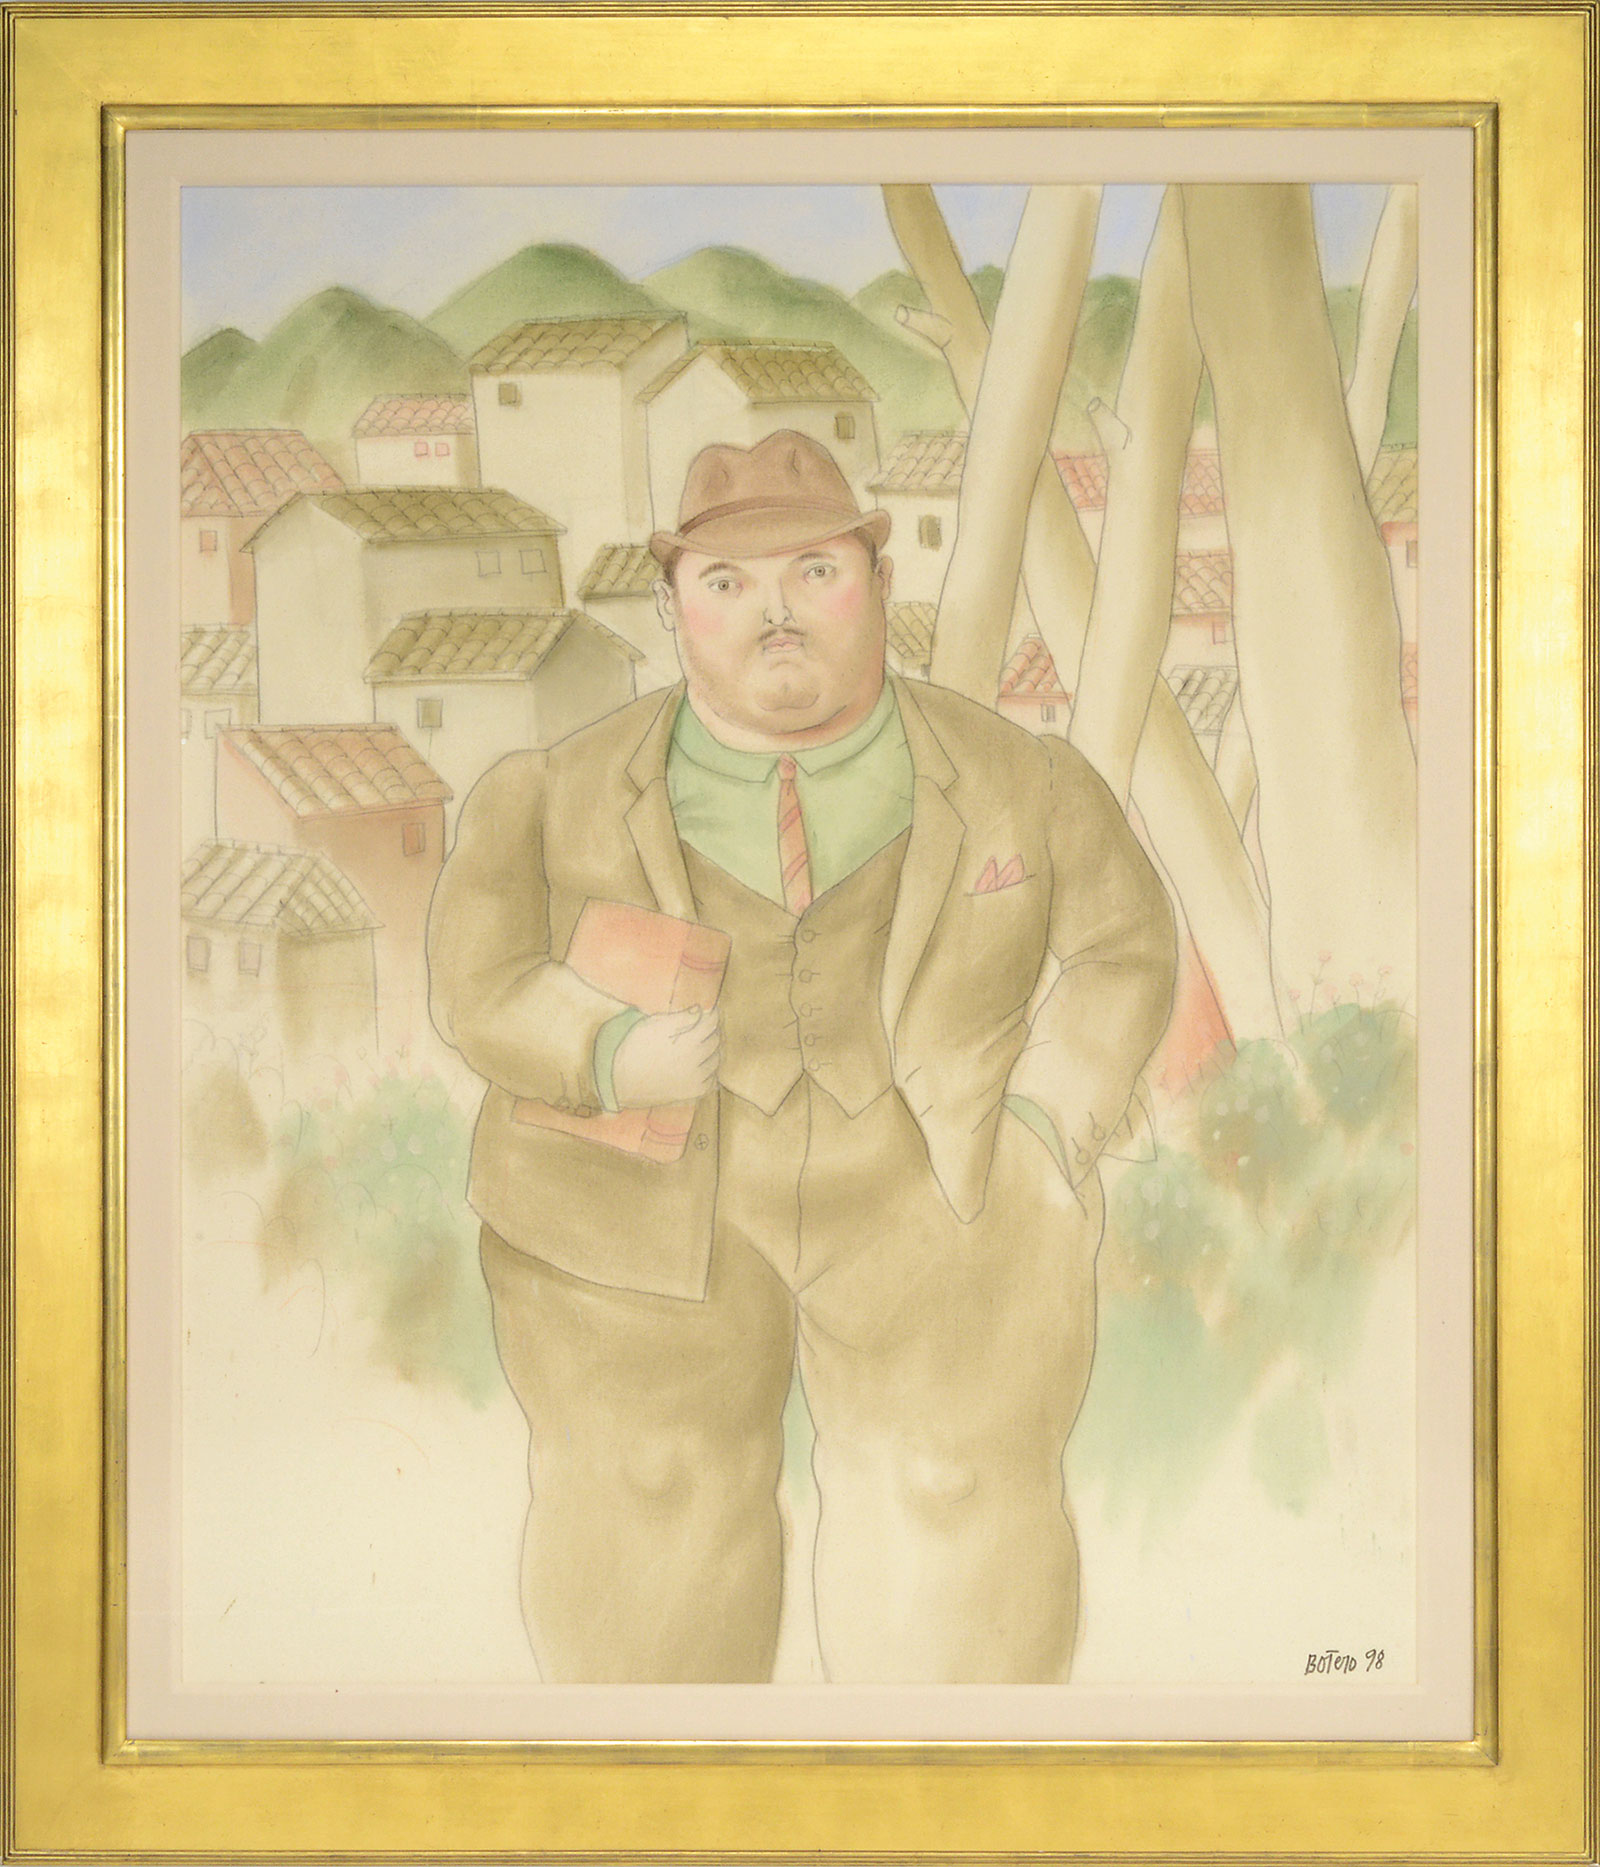 Fernando Botero (Colombian/American, 1932-) "A Lawyer", estimated at $125,000-175,000.